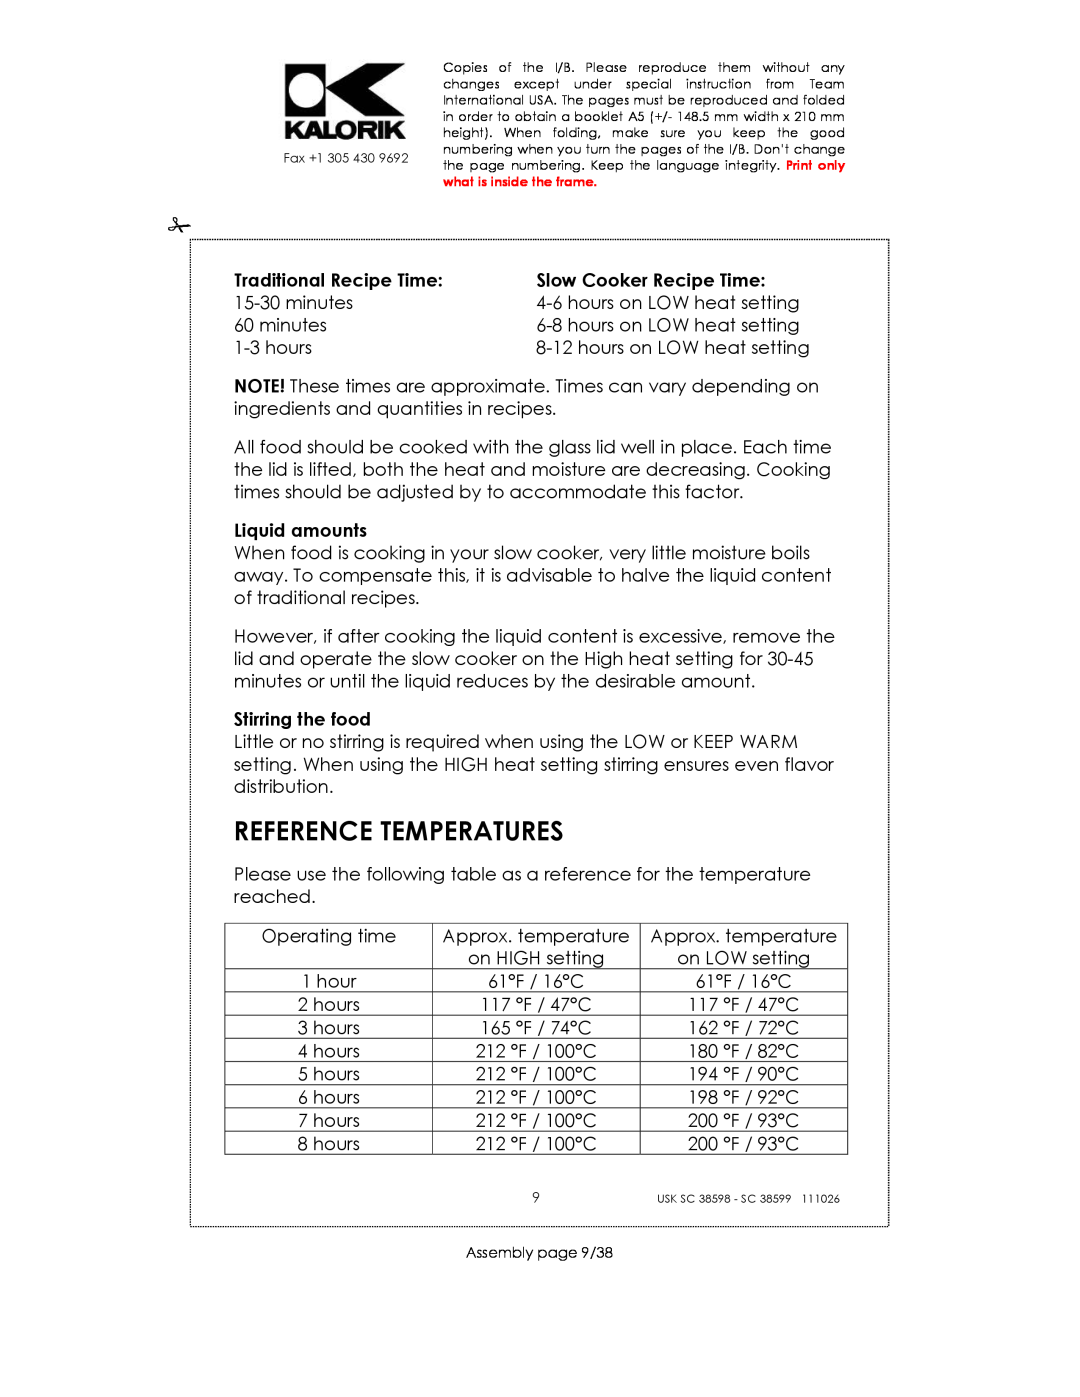 Kalorik 38599 Reference Temperatures, Traditional Recipe Time, Slow Cooker Recipe Time, Liquid amounts, Stirring the food 